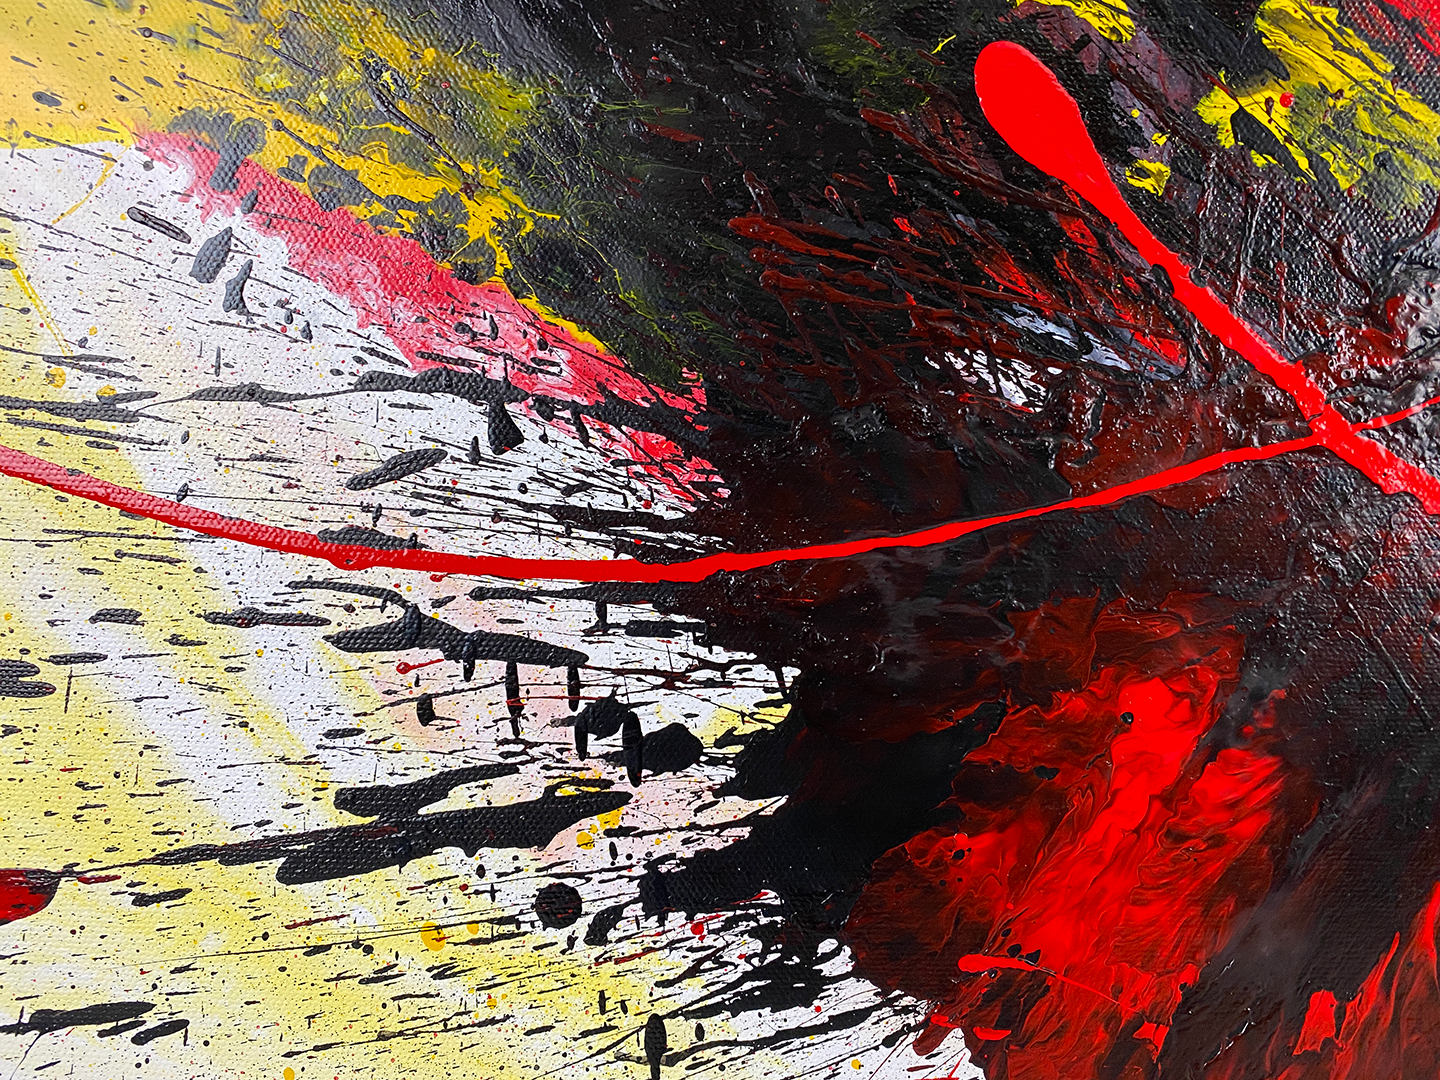 Abstract, expressionism, acrylic painting close-up 2. Tumultuous explosion of bright red, black, yellow and white on a Gallery-Wrapped canvas